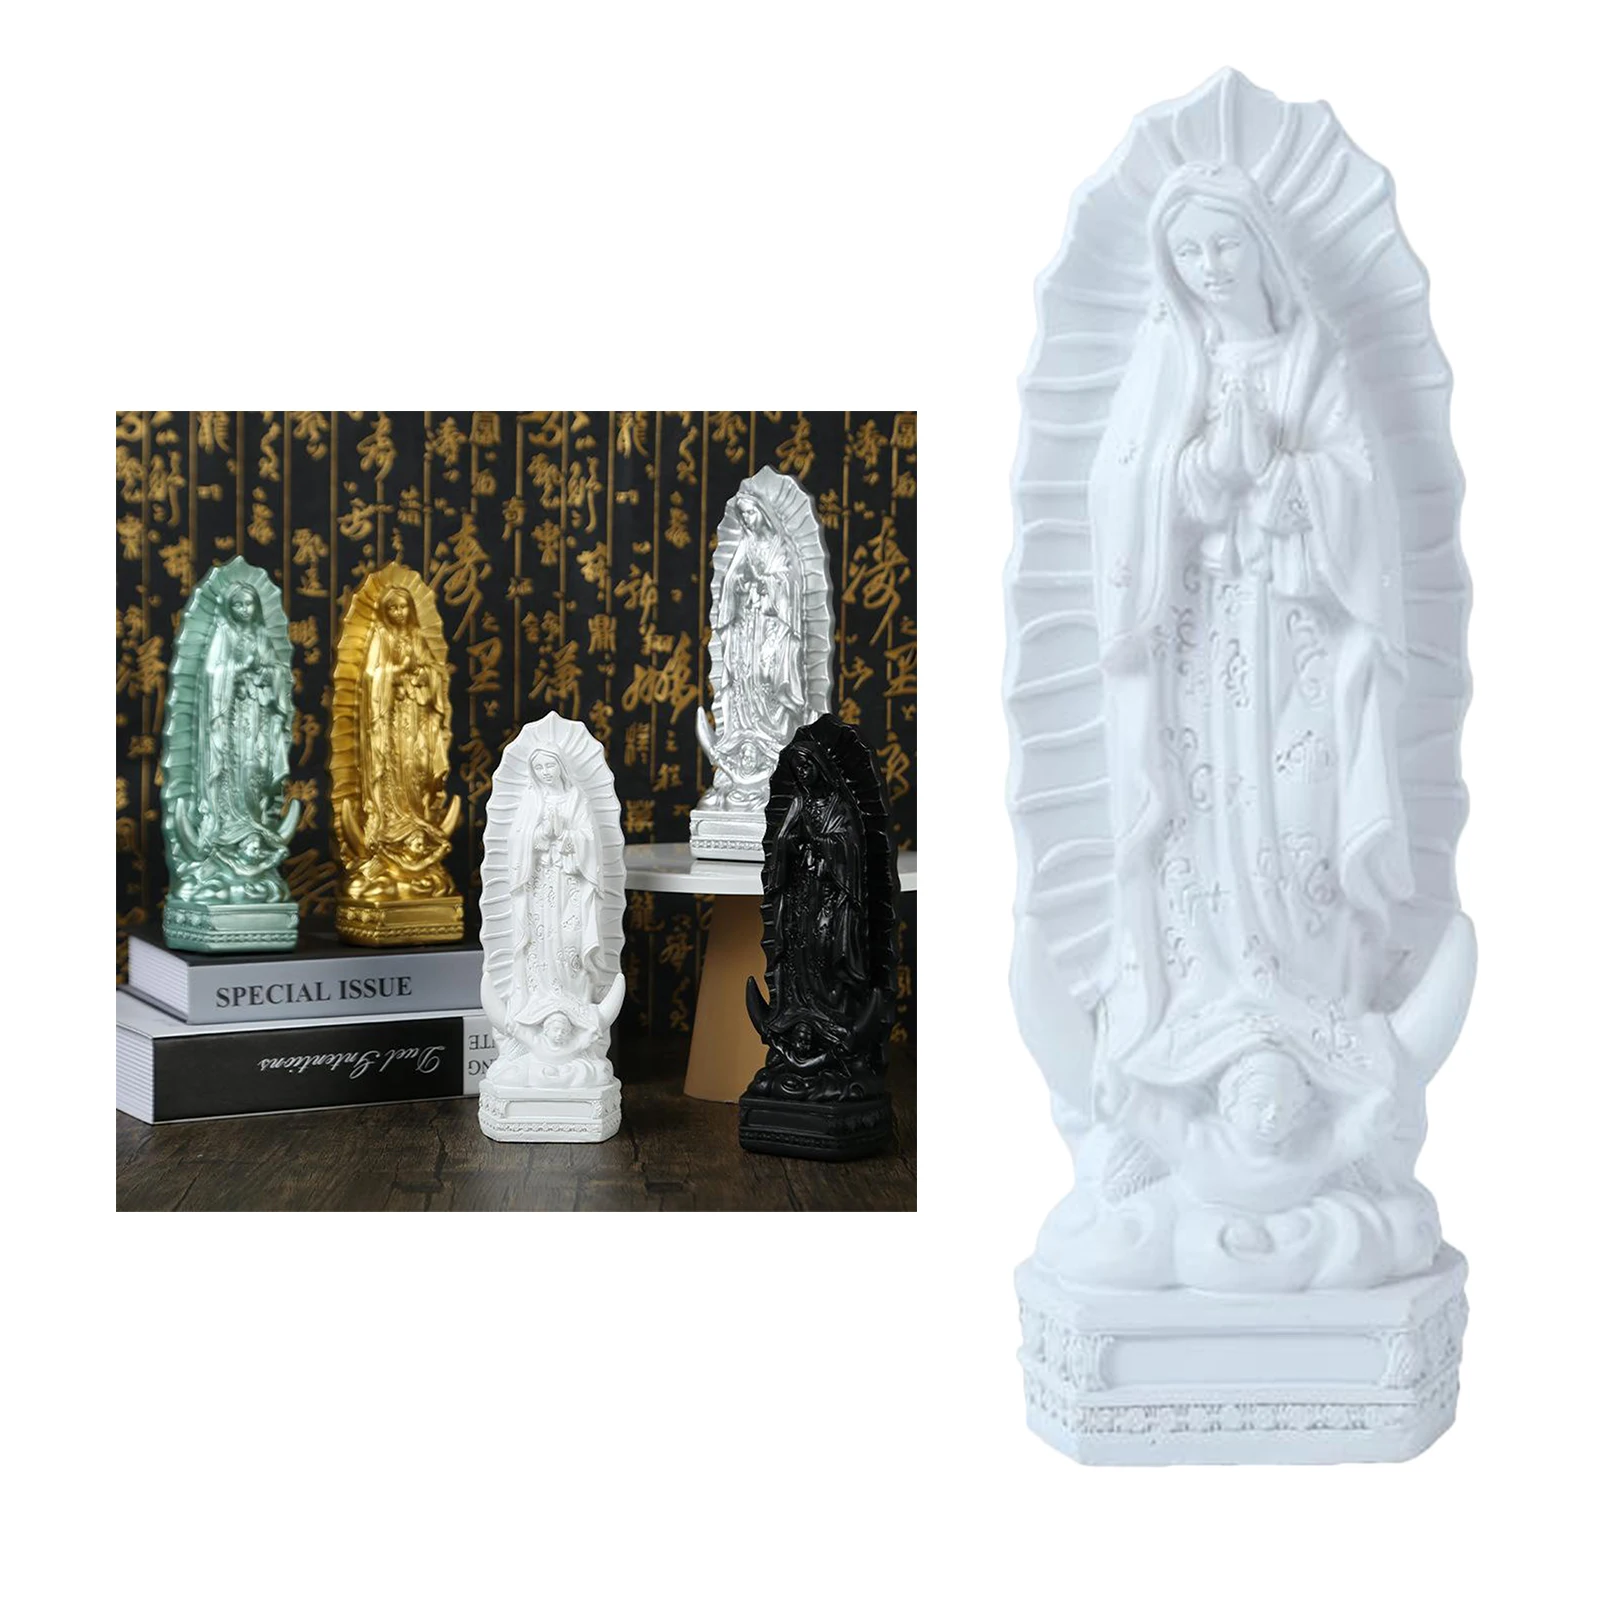 Virgin Mary Figurines Our Lady of Lourdes Christian Figurine Sculpture